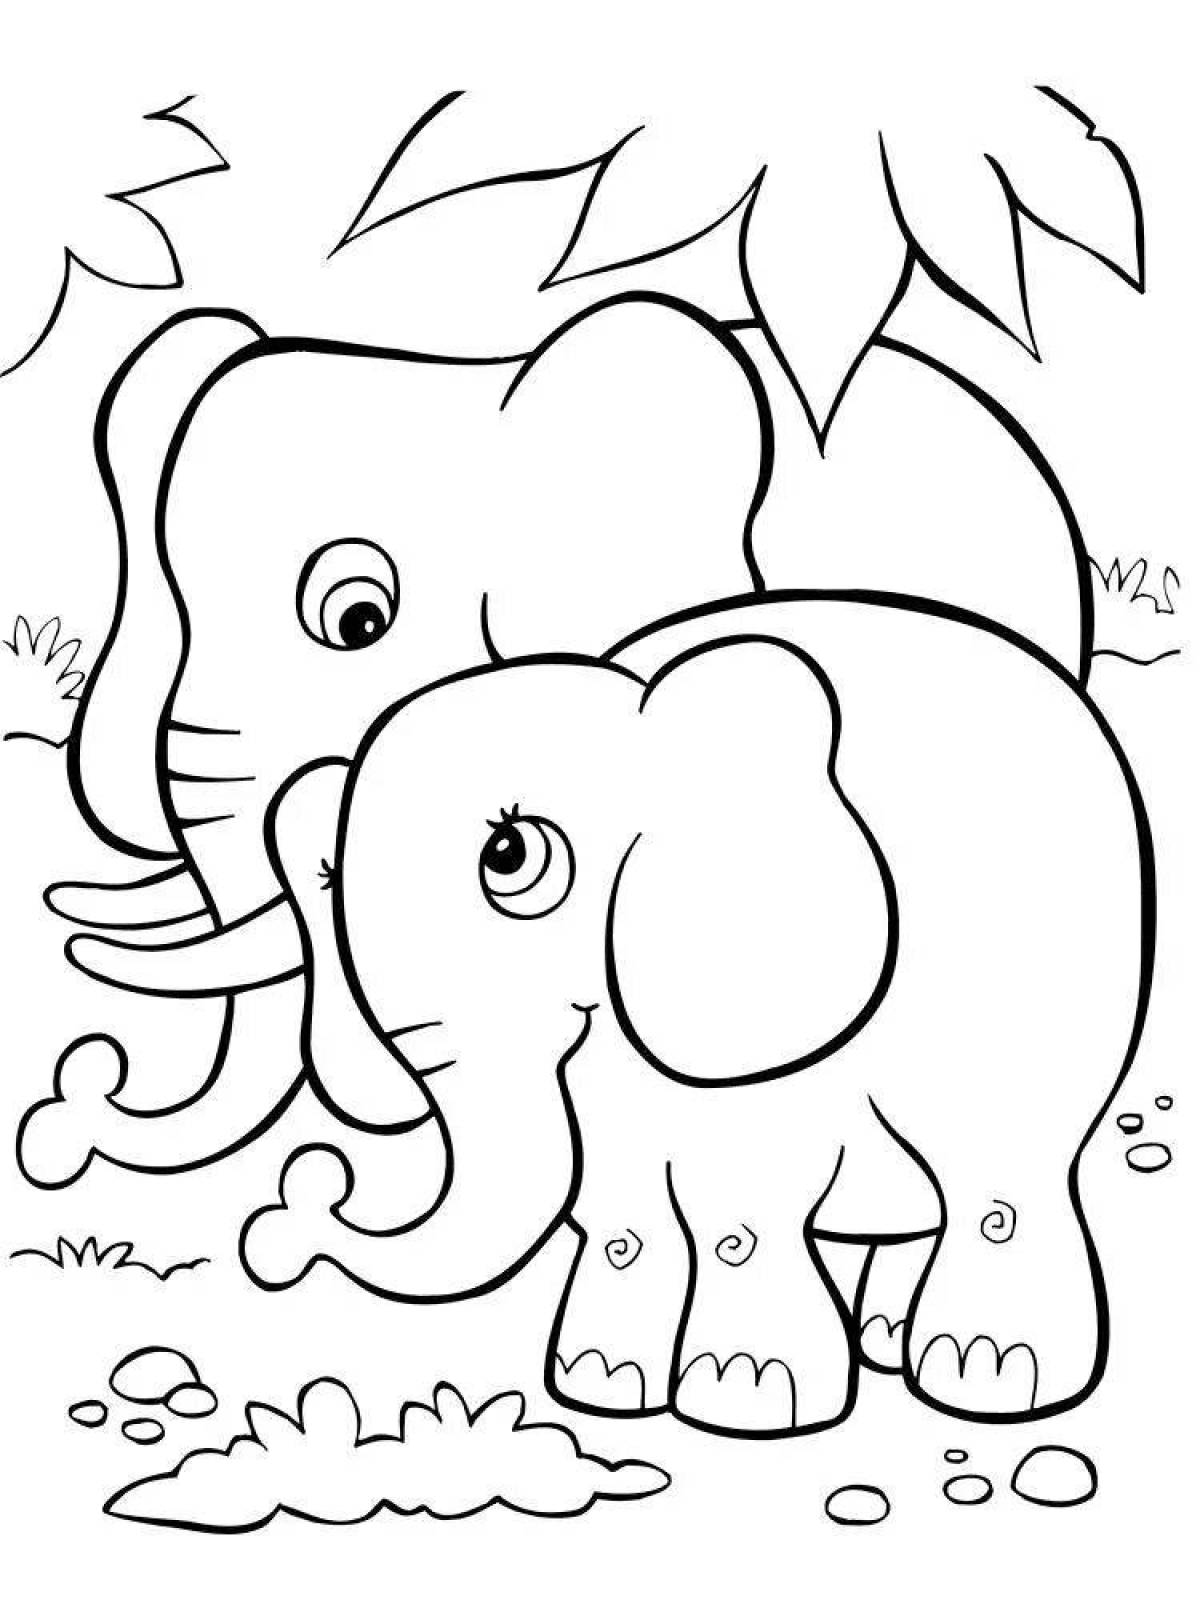 Fancy elephant coloring for kids